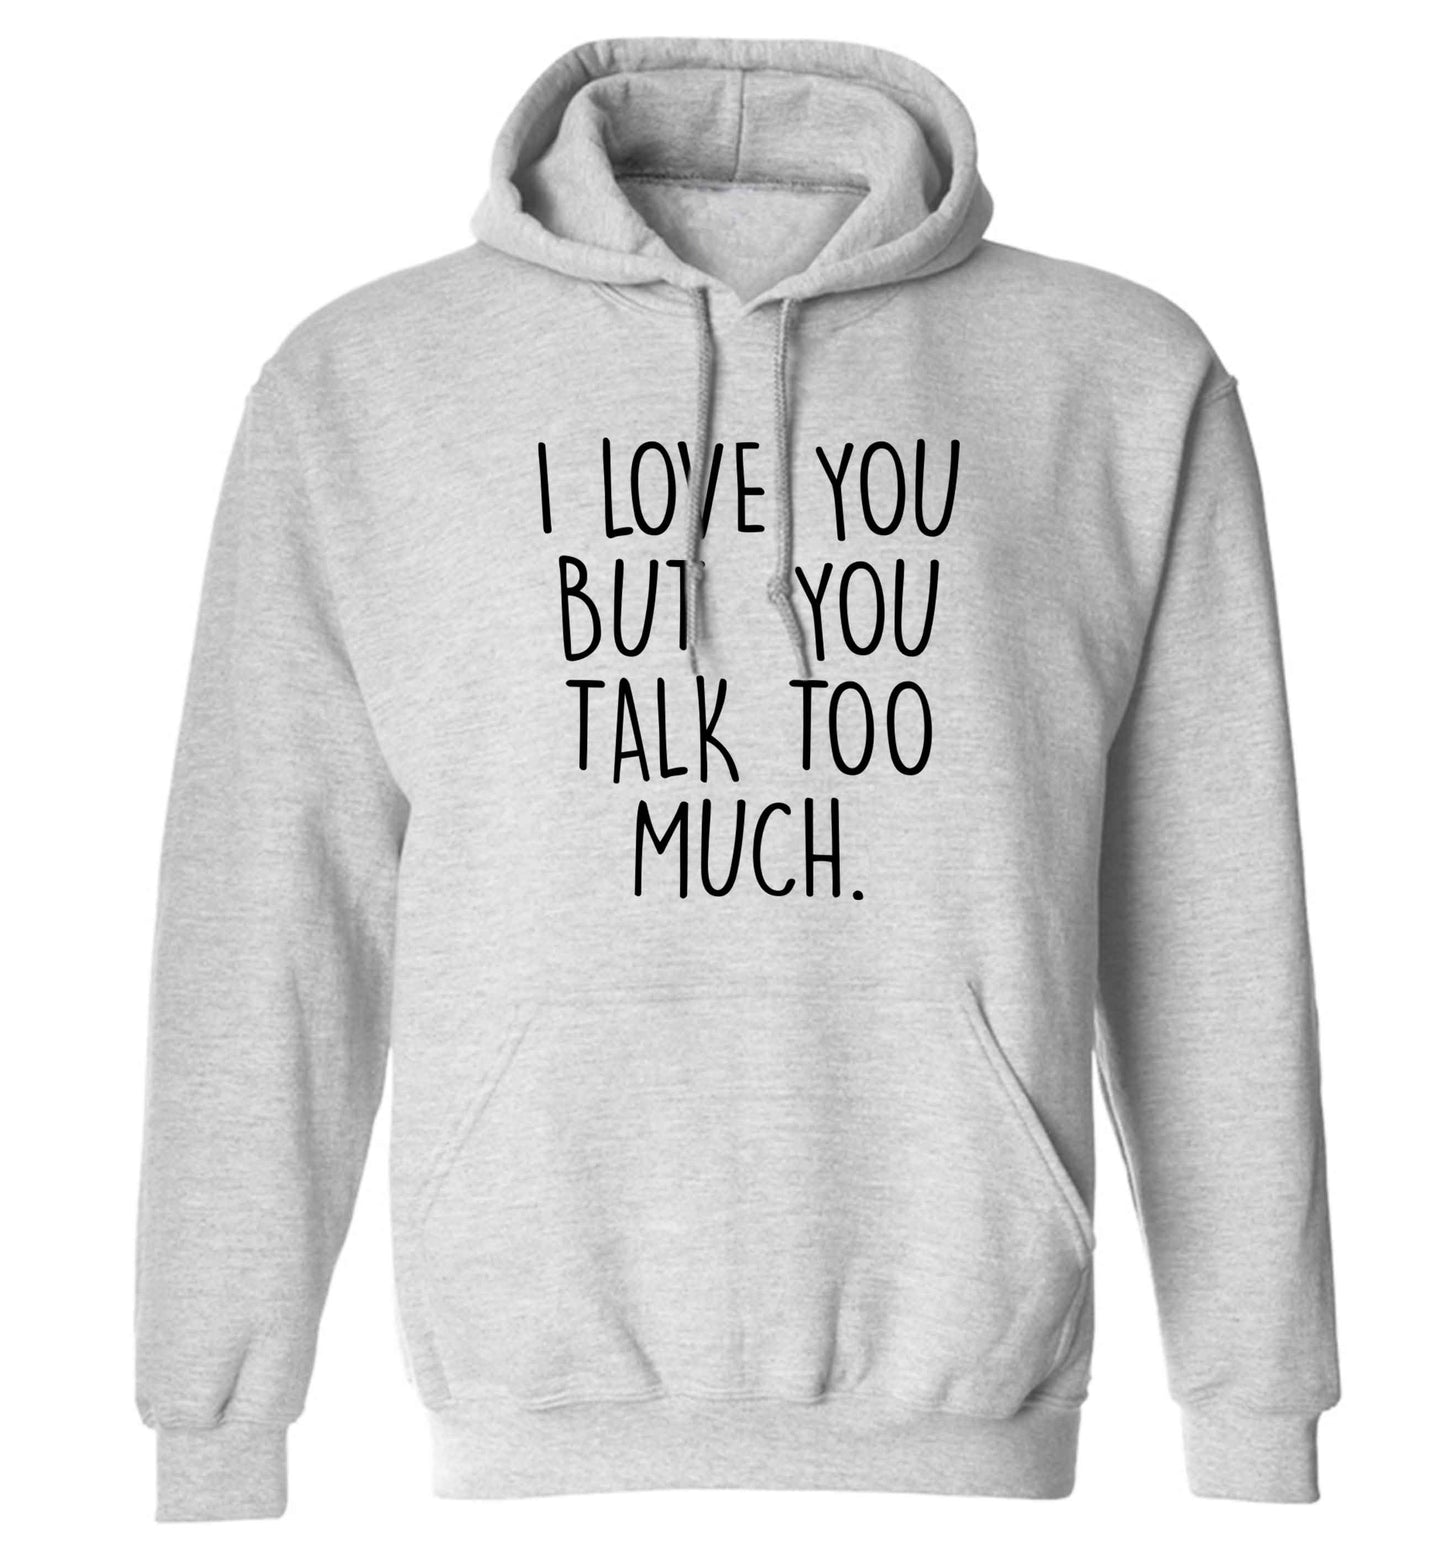 I love you but you talk too much adults unisex grey hoodie 2XL